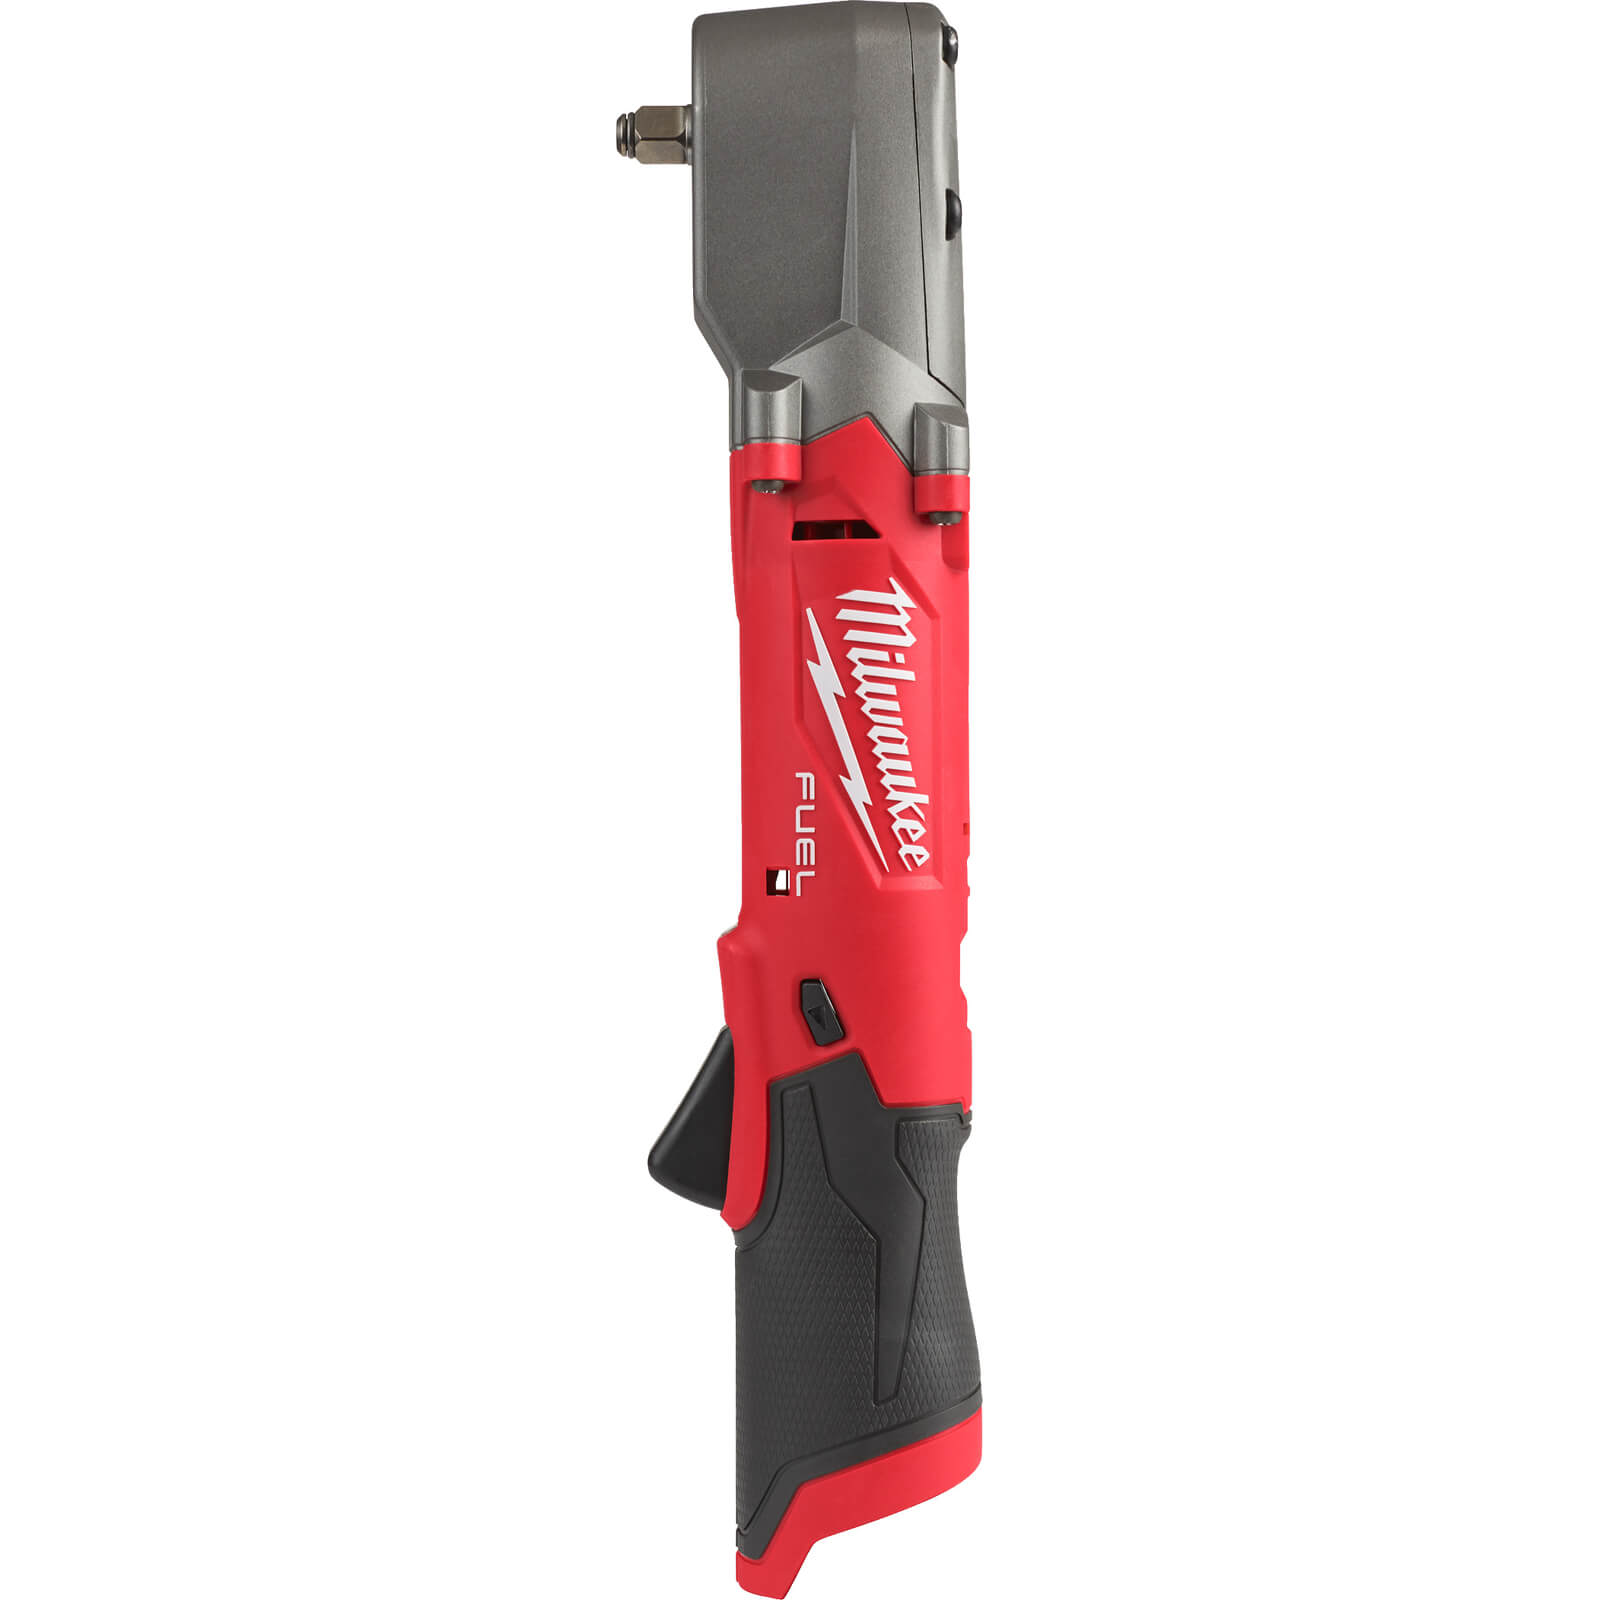 Image of Milwaukee M12 FRAIWF38 Fuel 12v Cordless Brushless 3/8" Drive Ratchet Wrench No Batteries No Charger No Case